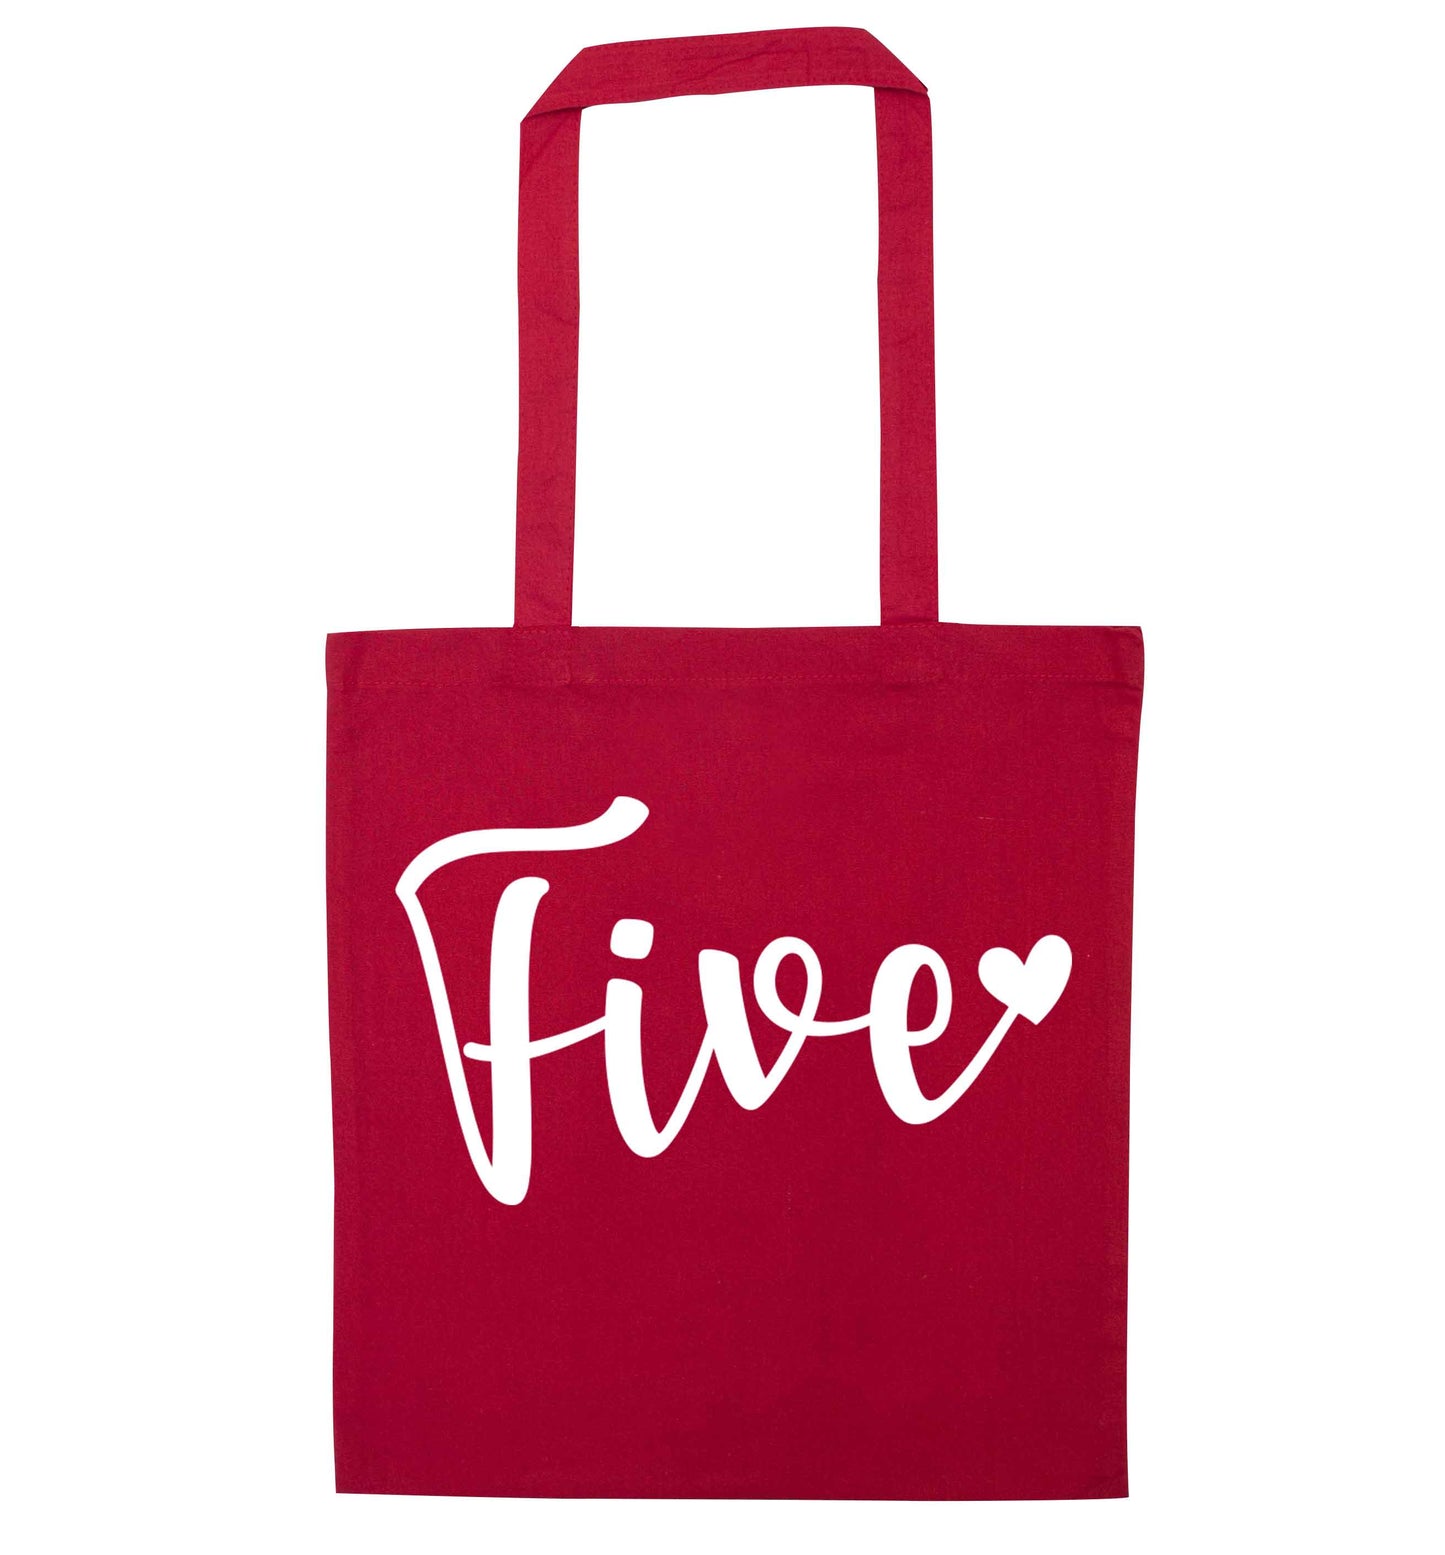 Five and heart red tote bag